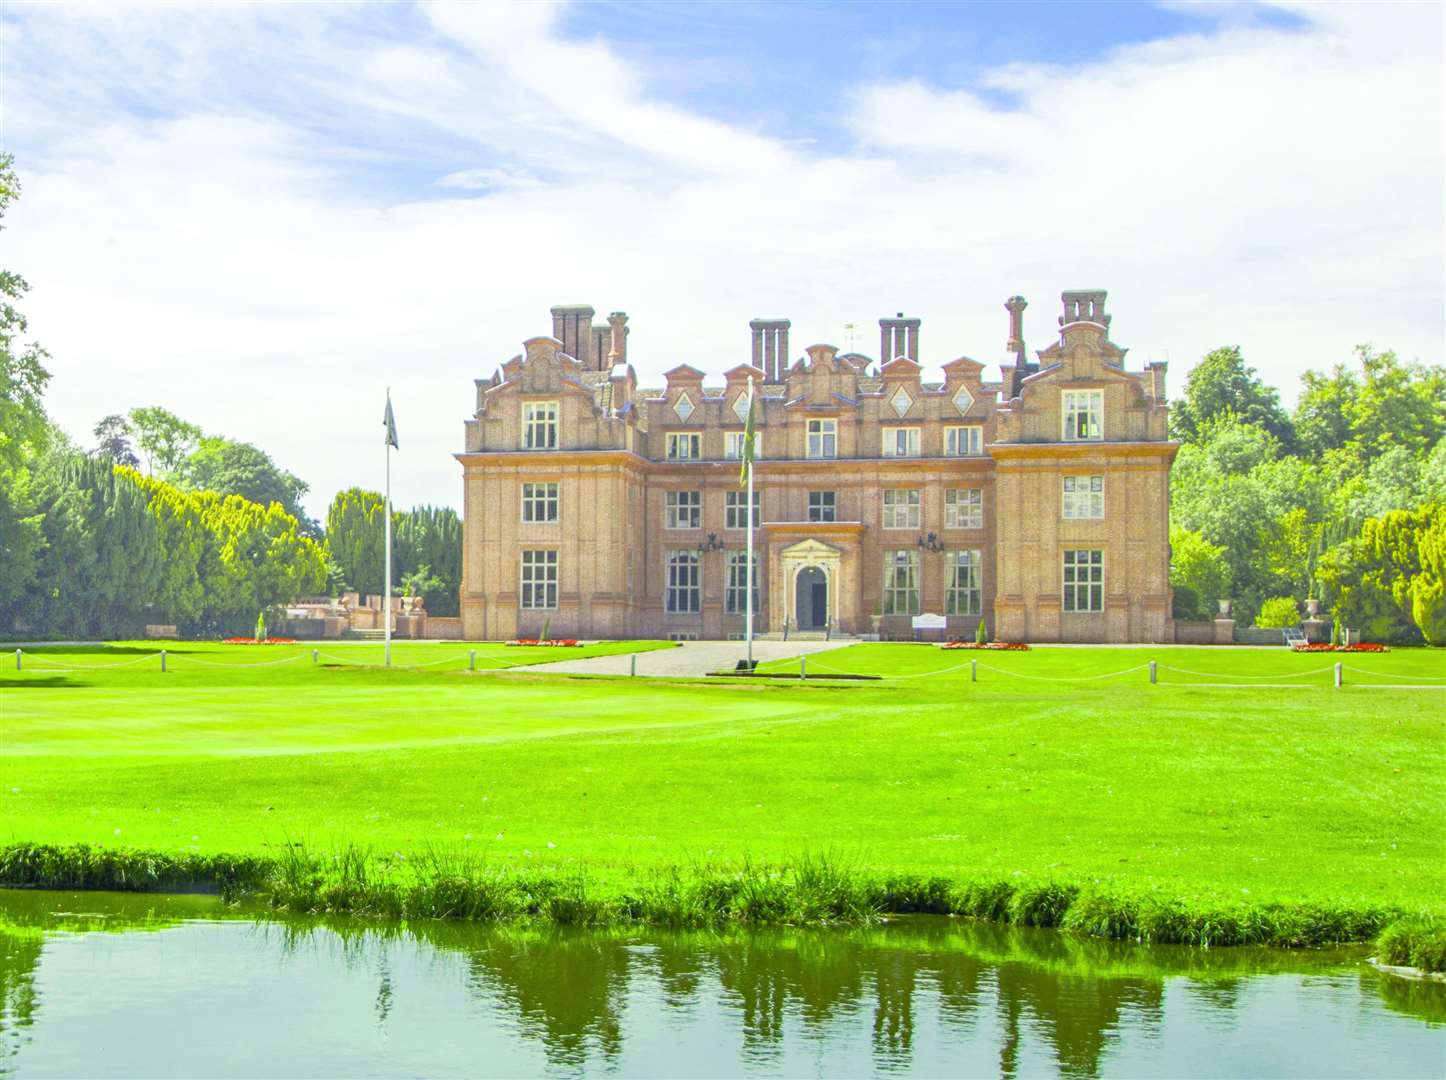 Broome Park was sold for £6 million in 2017